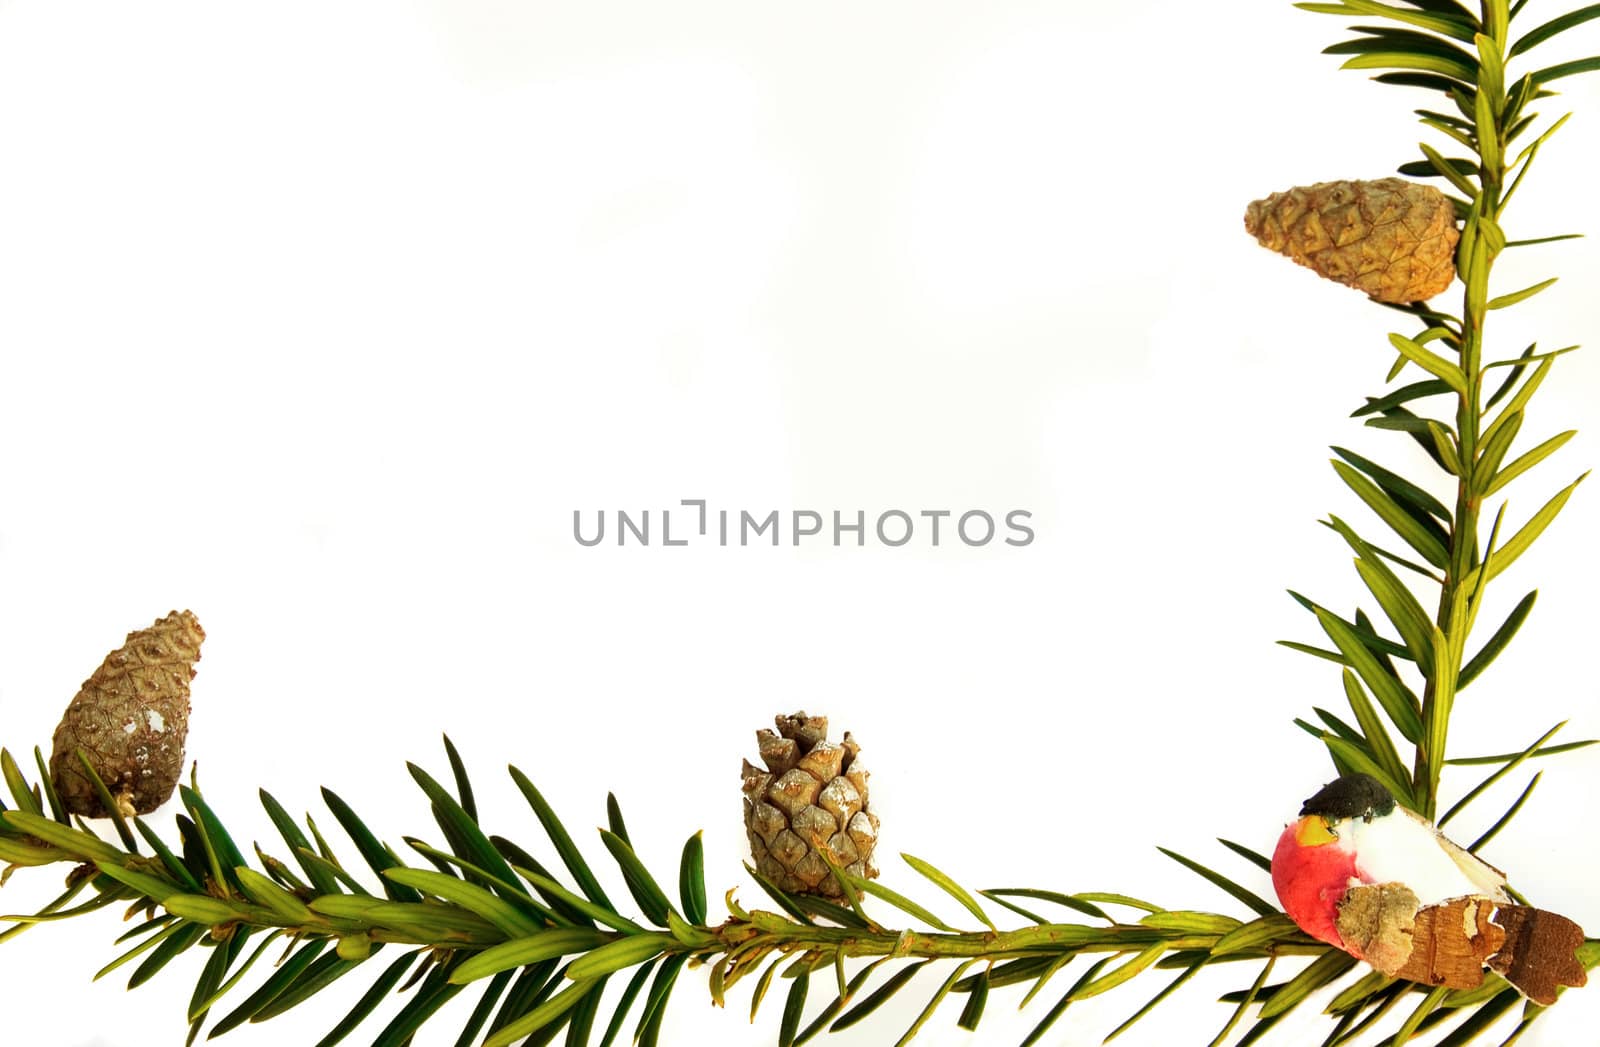 A simple frame made of pine branches and cones. isolated